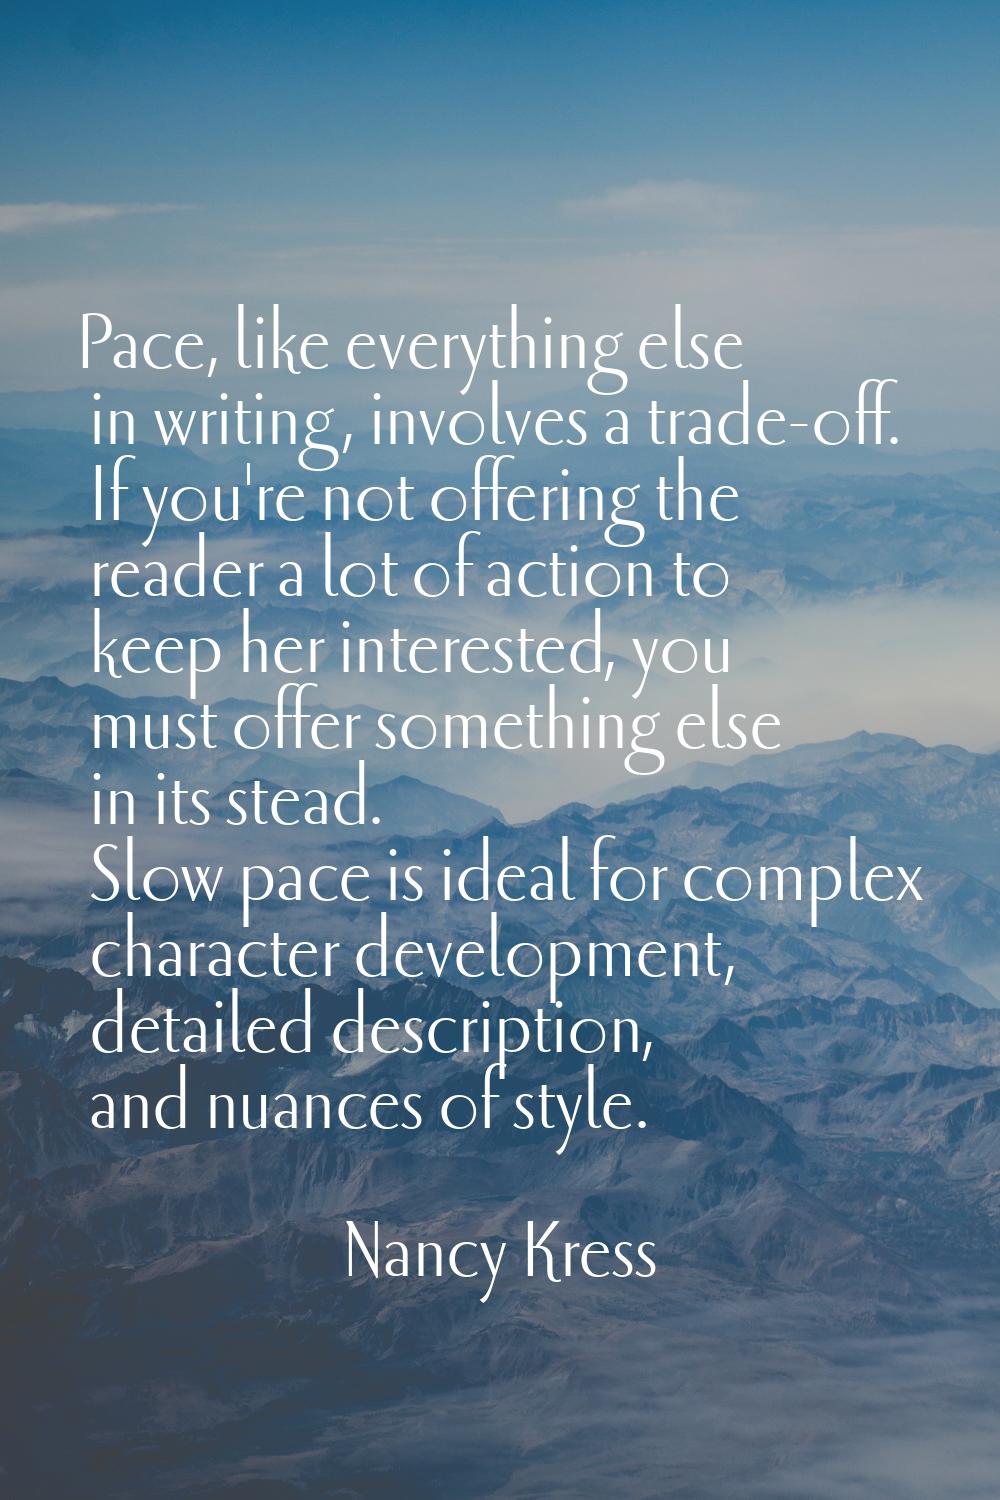 Pace, like everything else in writing, involves a trade-off. If you're not offering the reader a lo